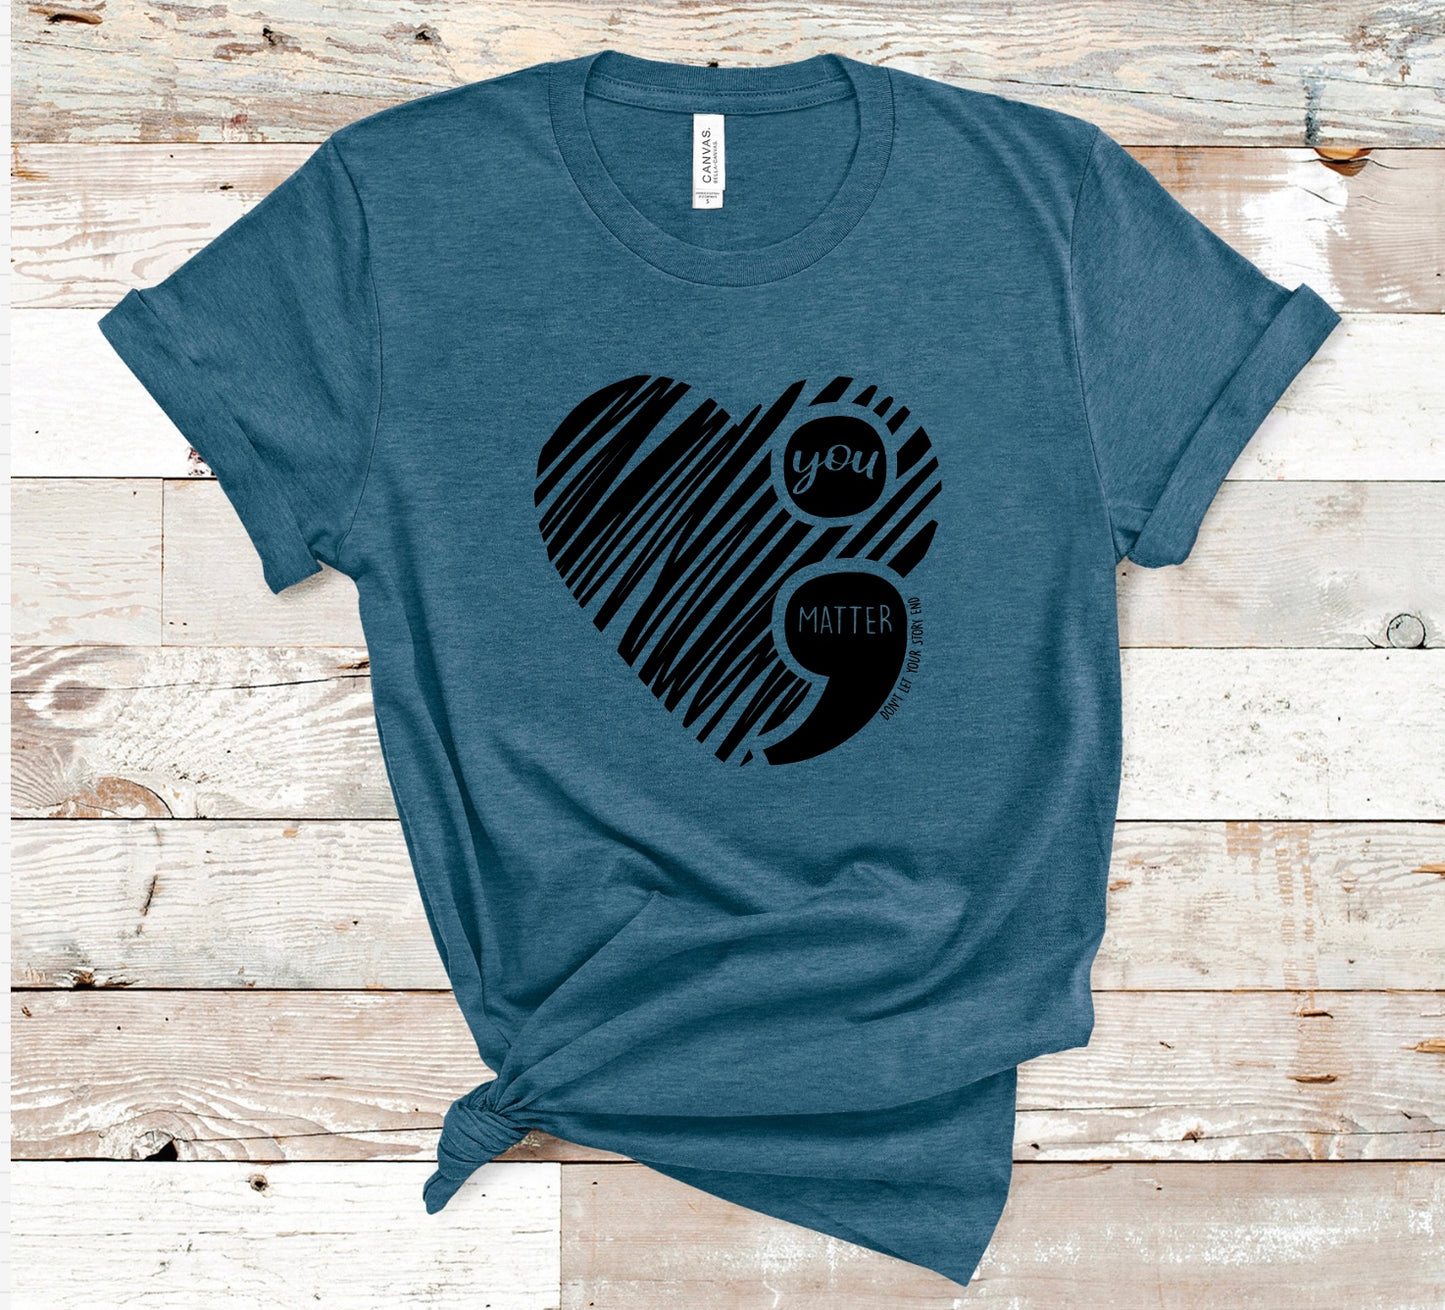 You matter semi colon suicide prevention unisex t-shirt for women in heather deep teal